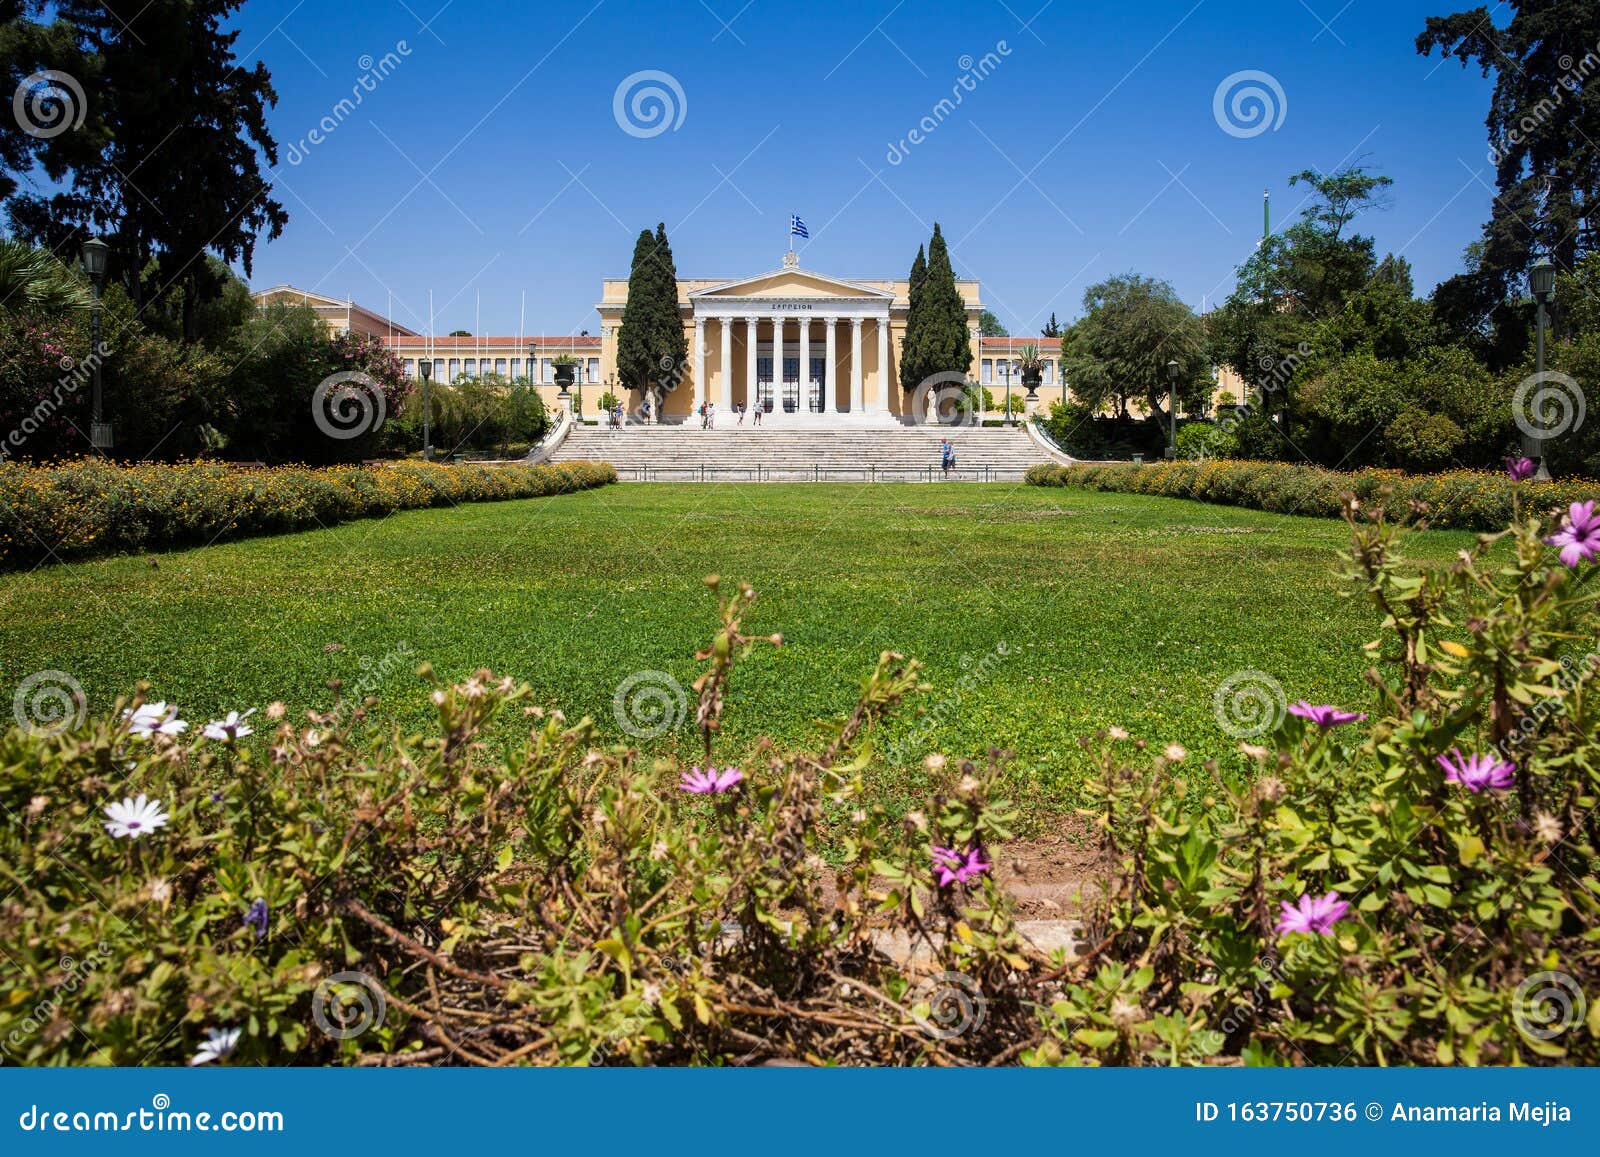 The Zappeion A Building In The National Gardens Of Athens In The